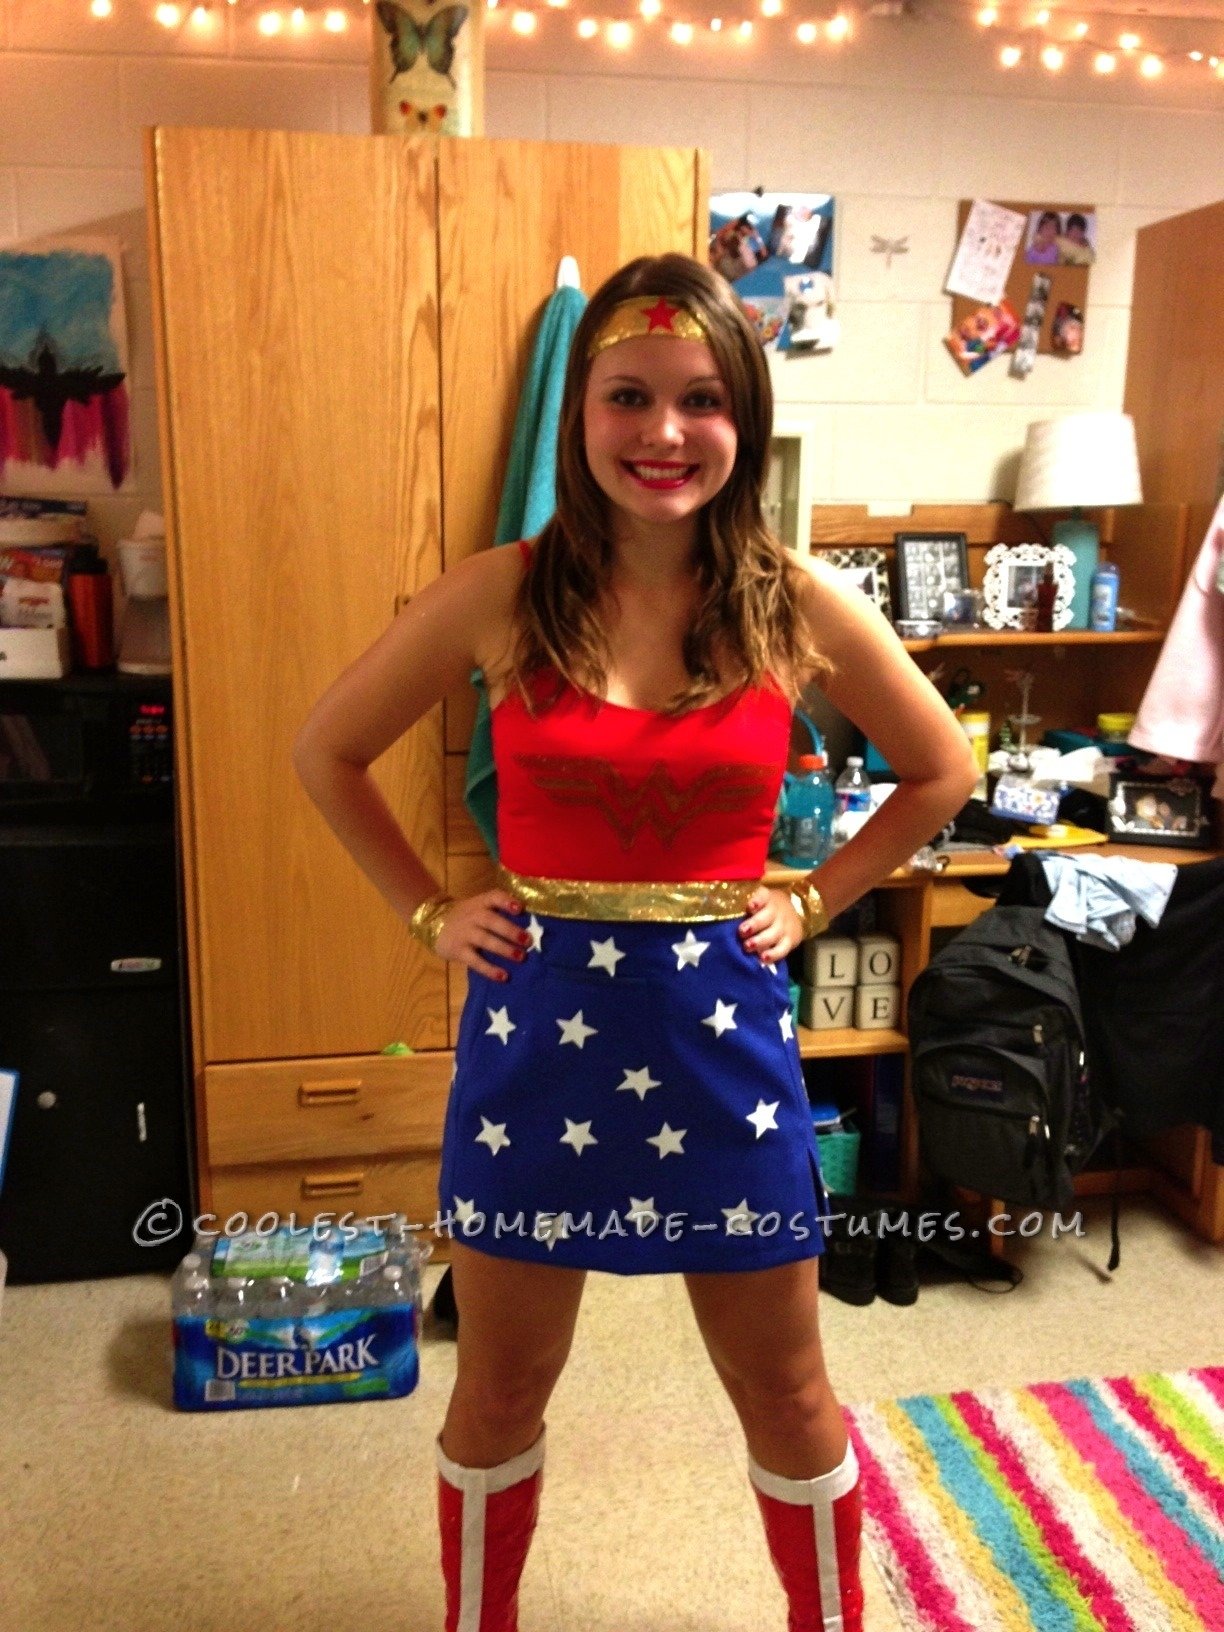 10 Lovable Homemade Costume Ideas For Girls 50 fiercely fabulous homemade wonder woman costumes 1 2022